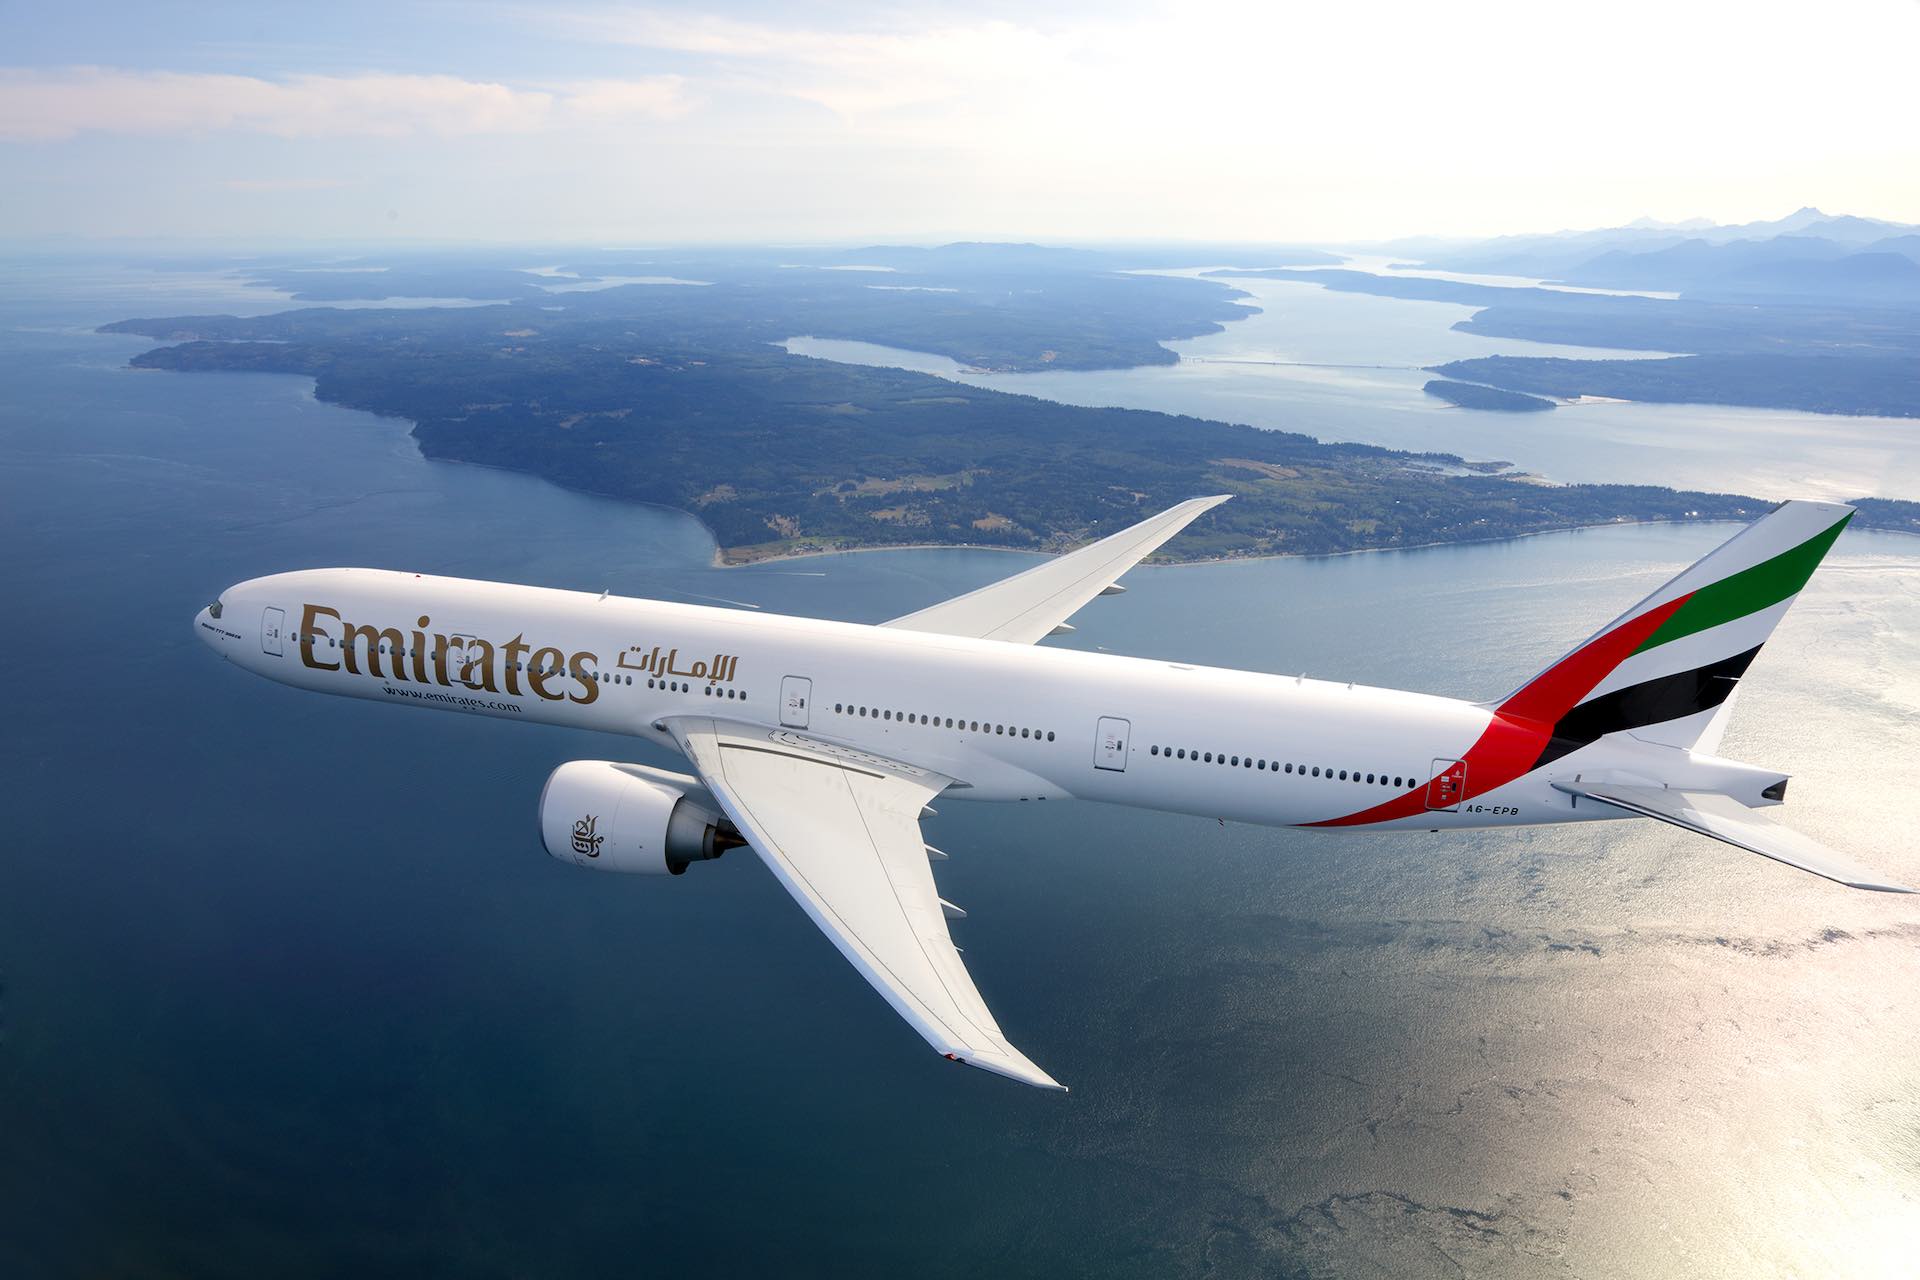 Micro, small and mid-sized enterprises are supported by Emirates